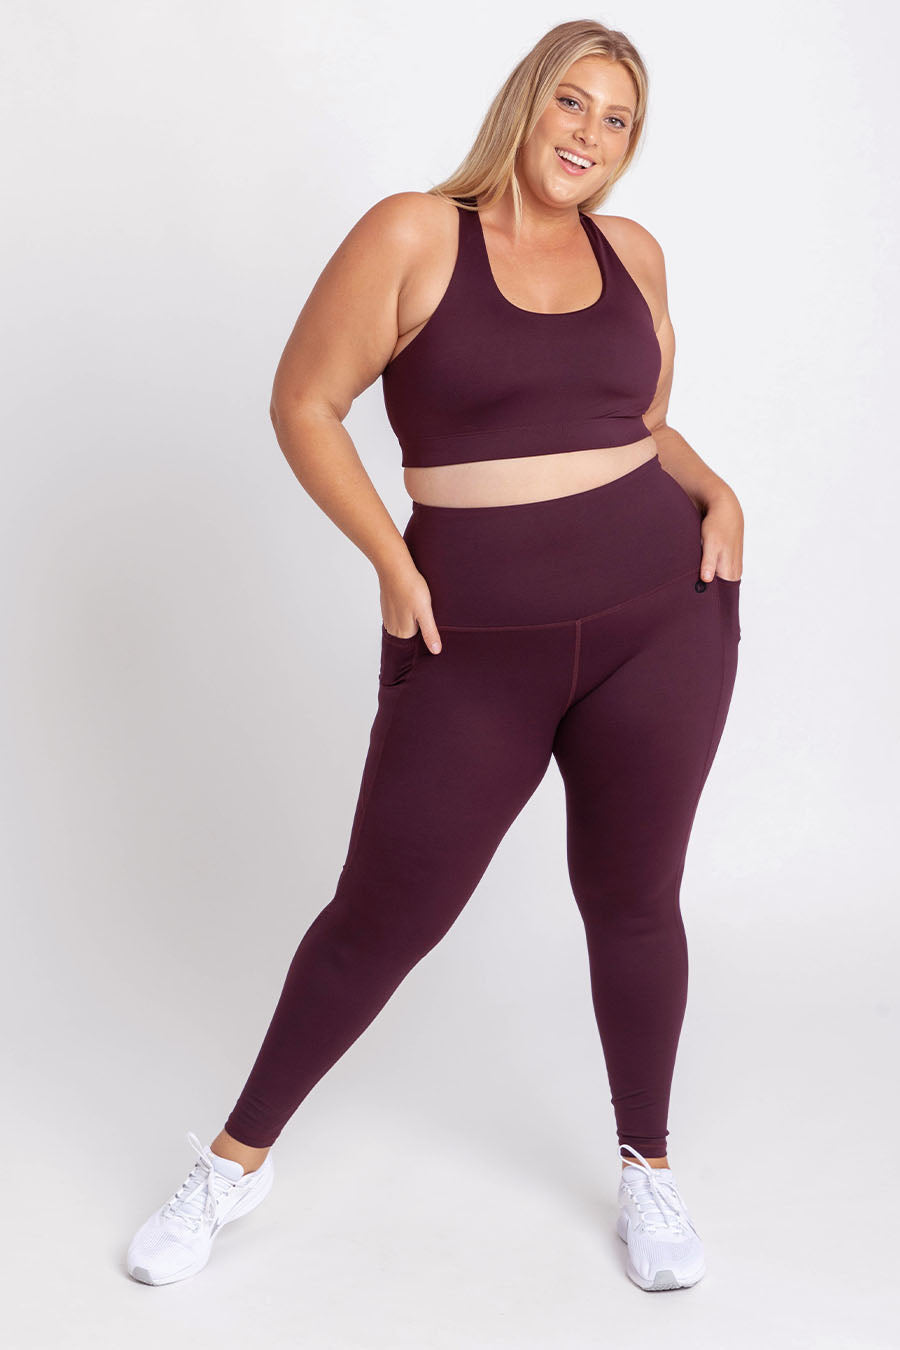 Training Pocket Full Length Tight - Wine from Active Truth™
